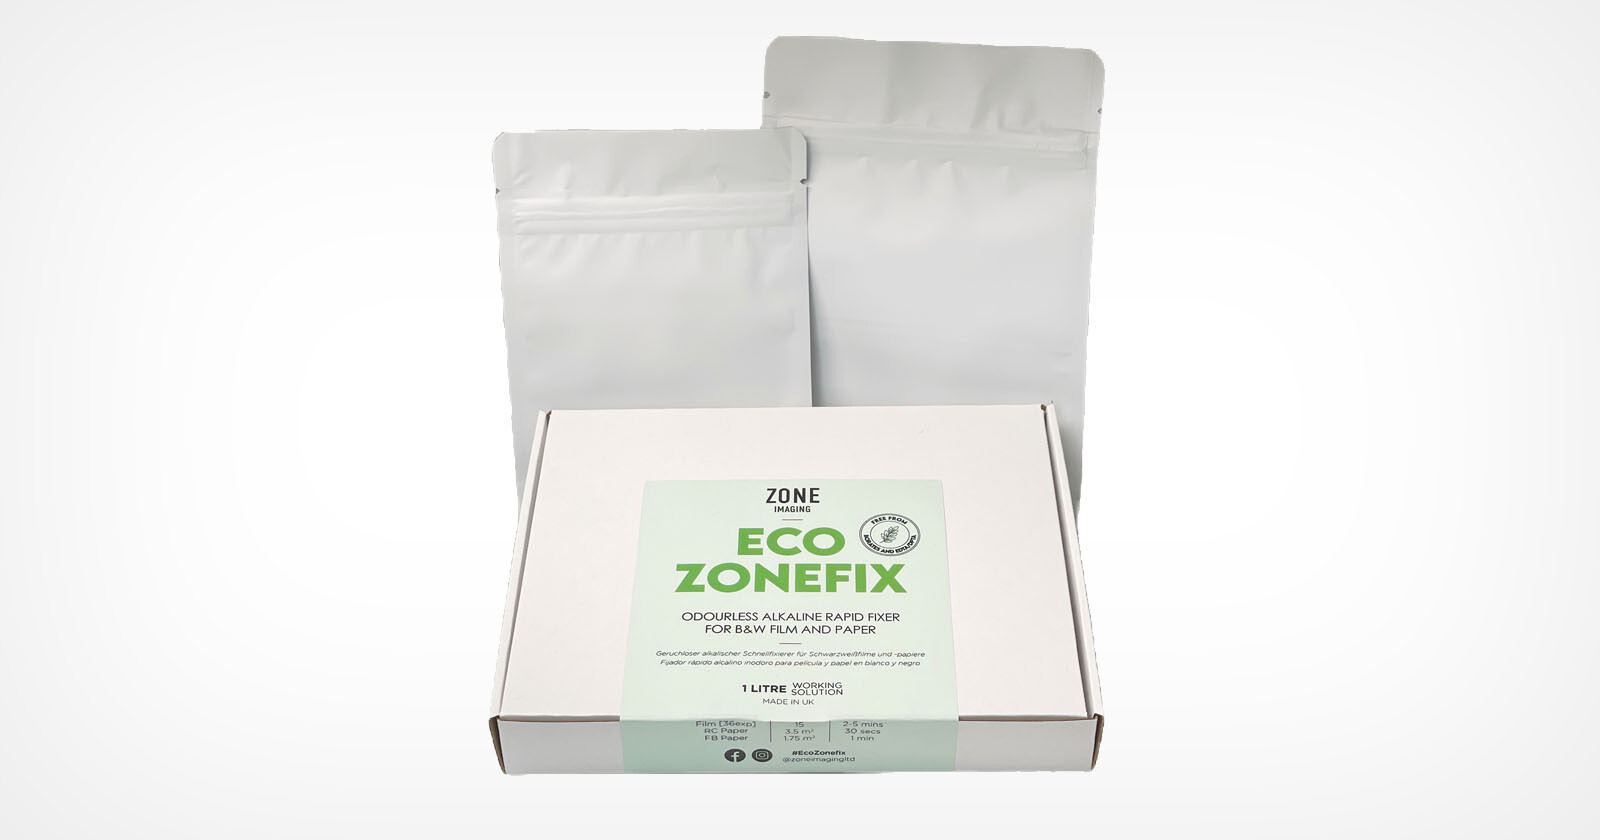 Eco Zonefix is a New Powered Earth-Friendly Rapid Fixer for Film and Paper